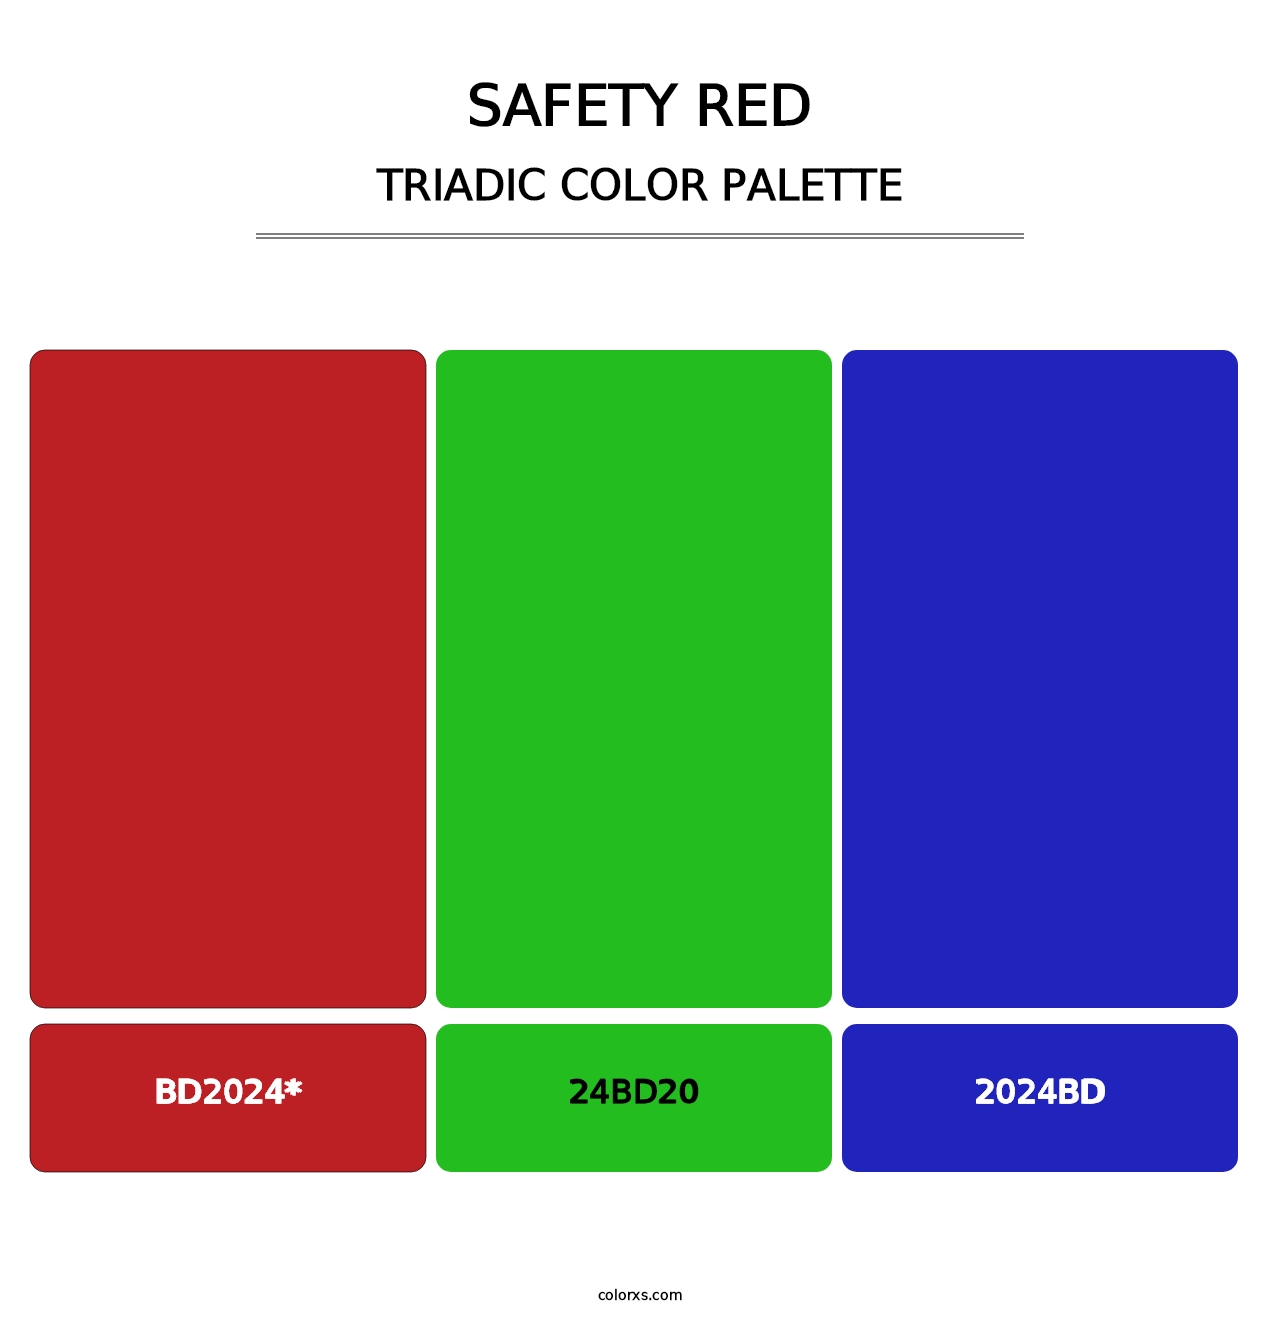 Safety Red - Triadic Color Palette